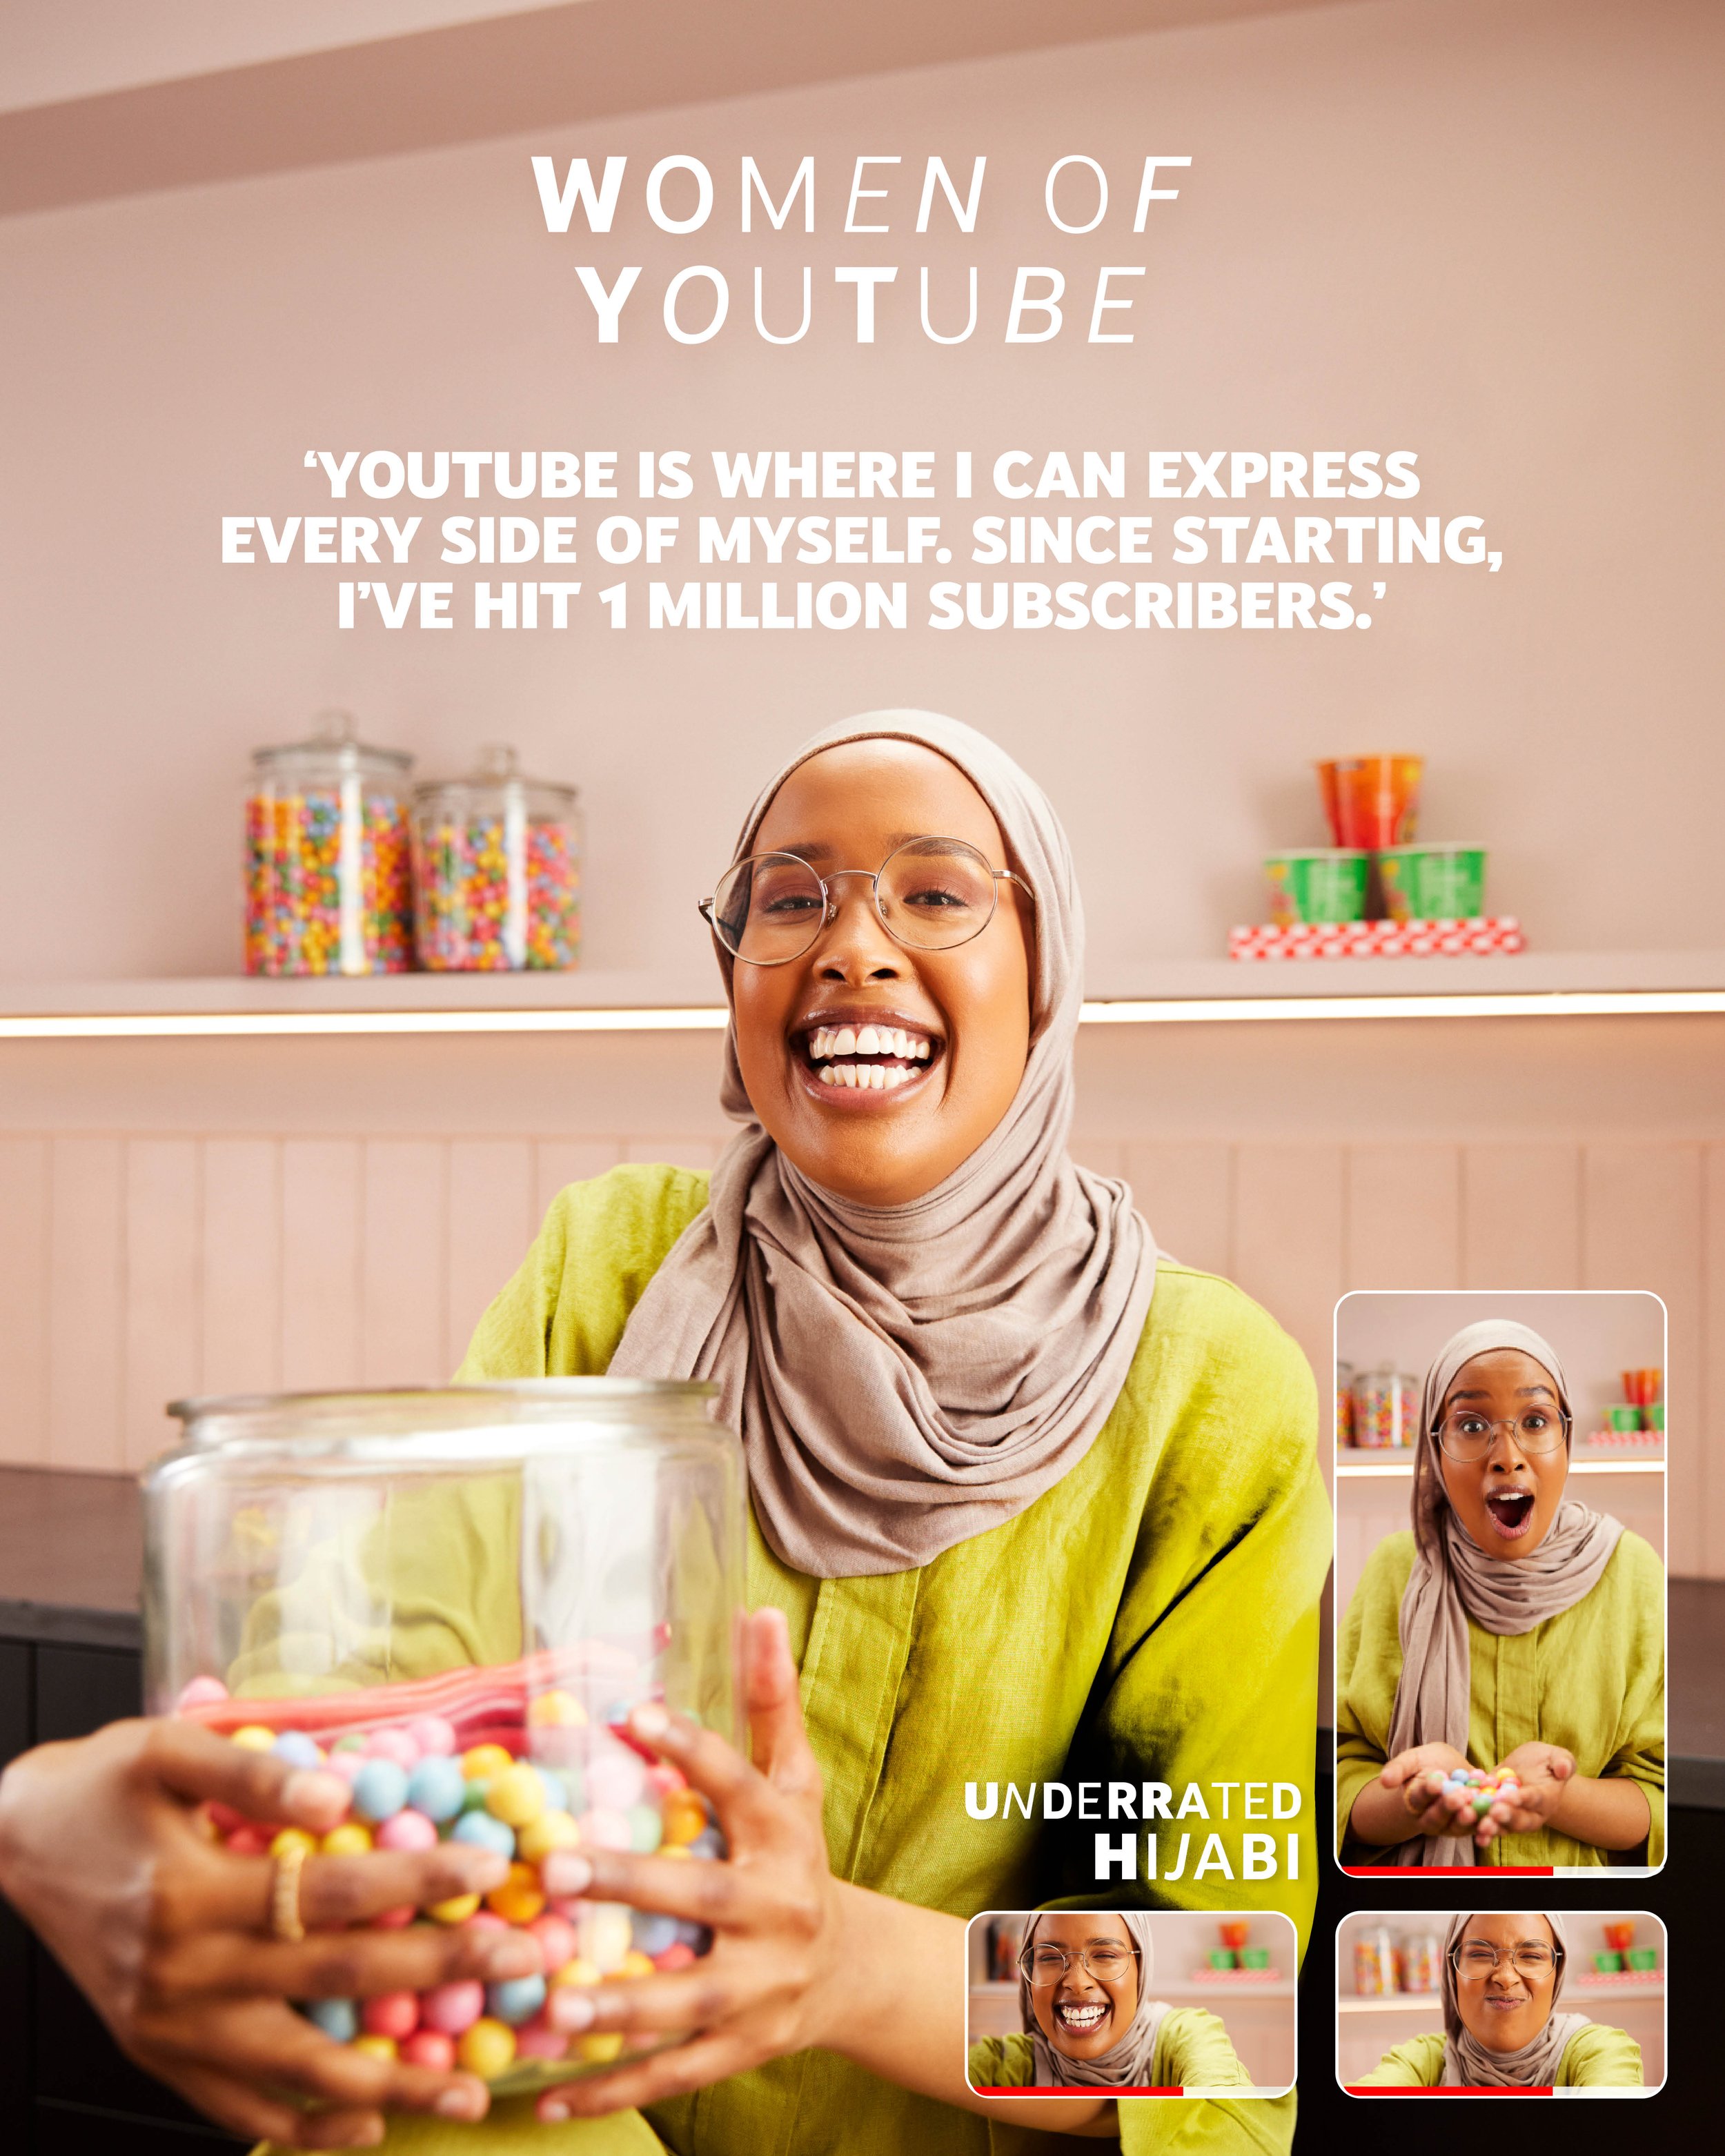 Underrated Hijabi, Women of Youtube for Youtube.